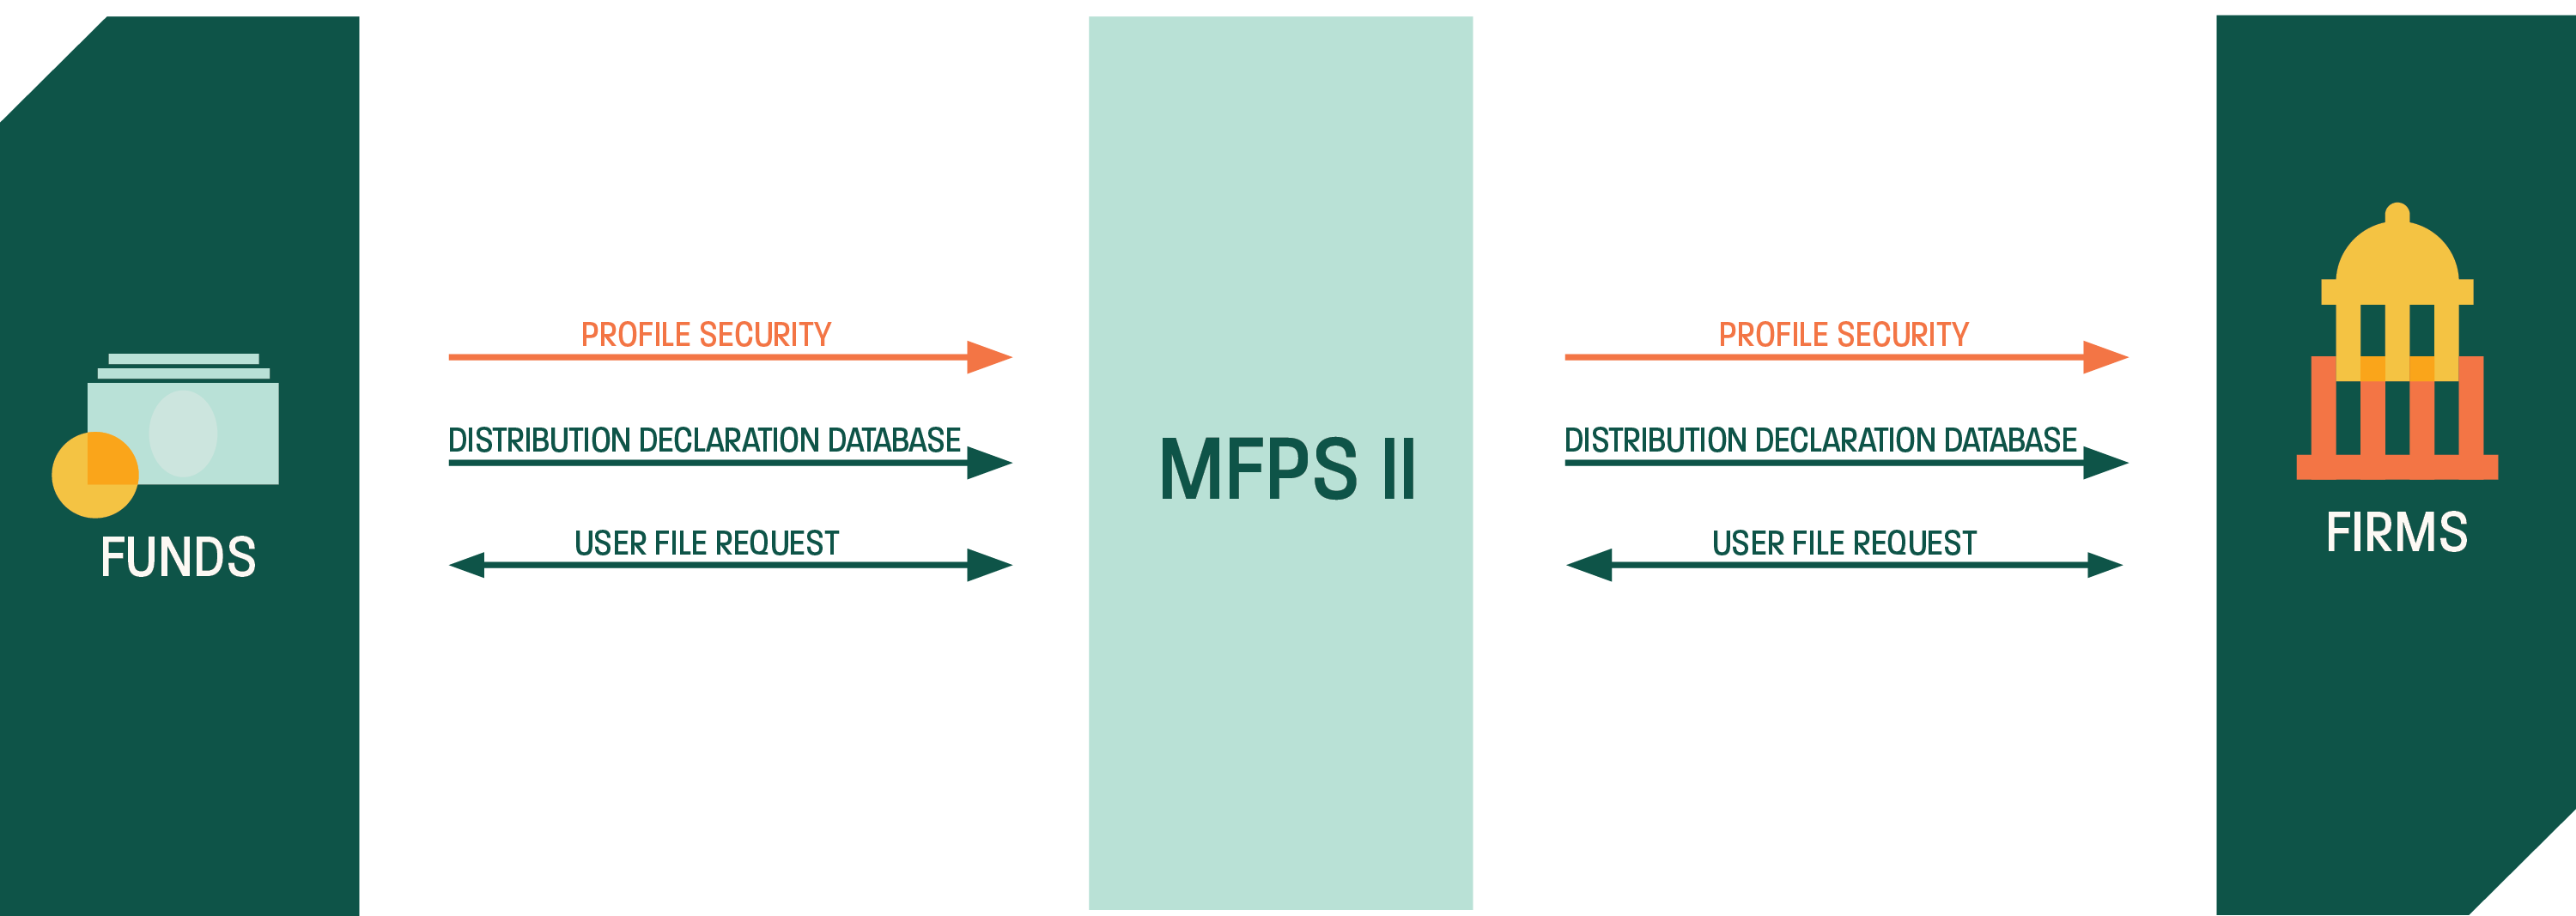 Mutual Funds Schematic MFPS II Workflow Diagram